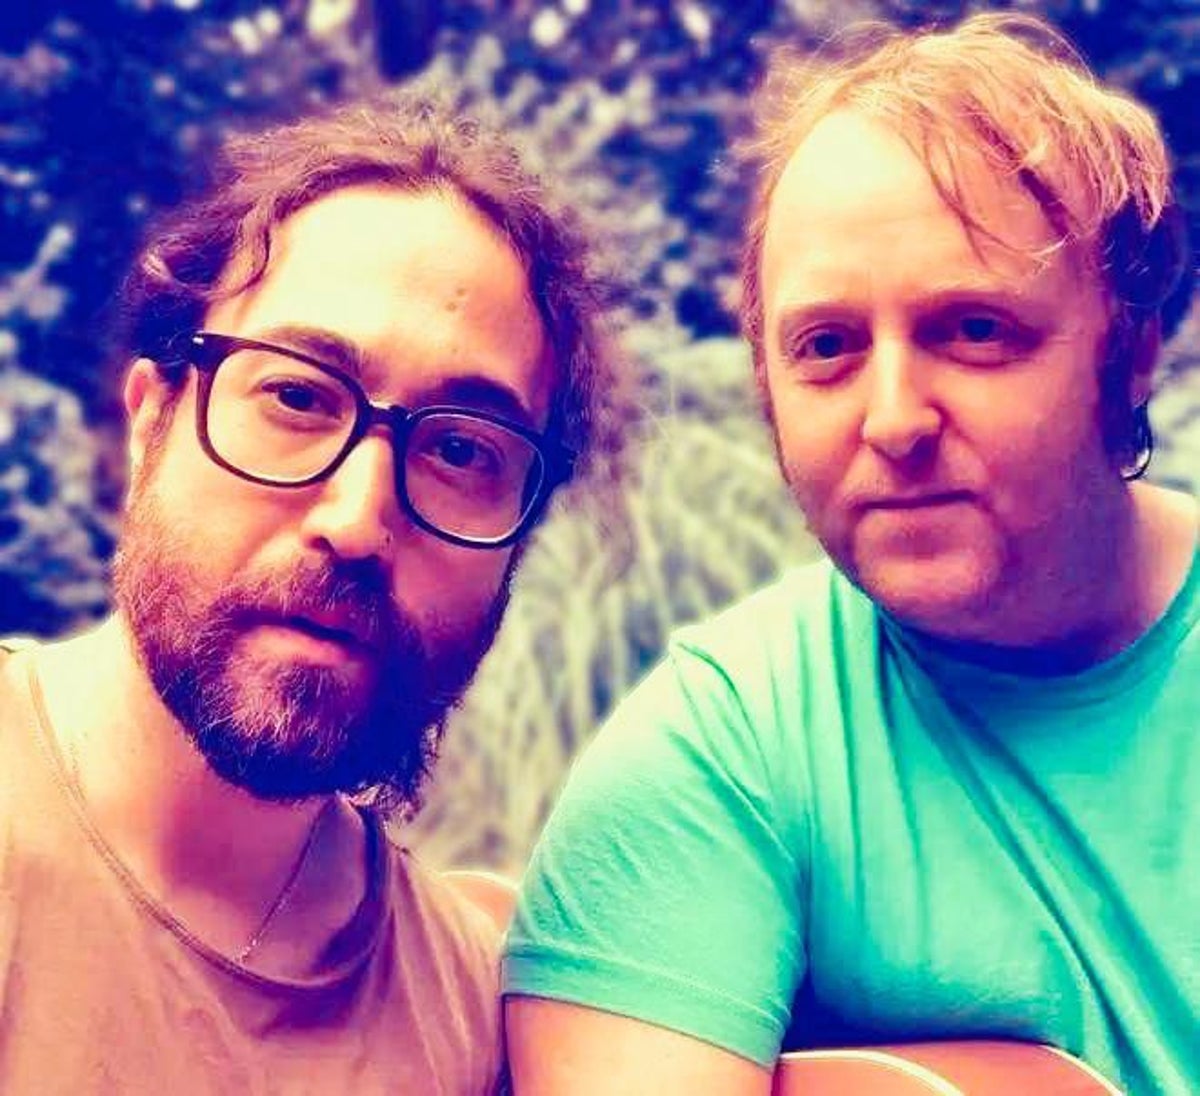 from strawberry fields to primrose hill: john lennon and paul mccartney’s sons come together with tribute to london landmark